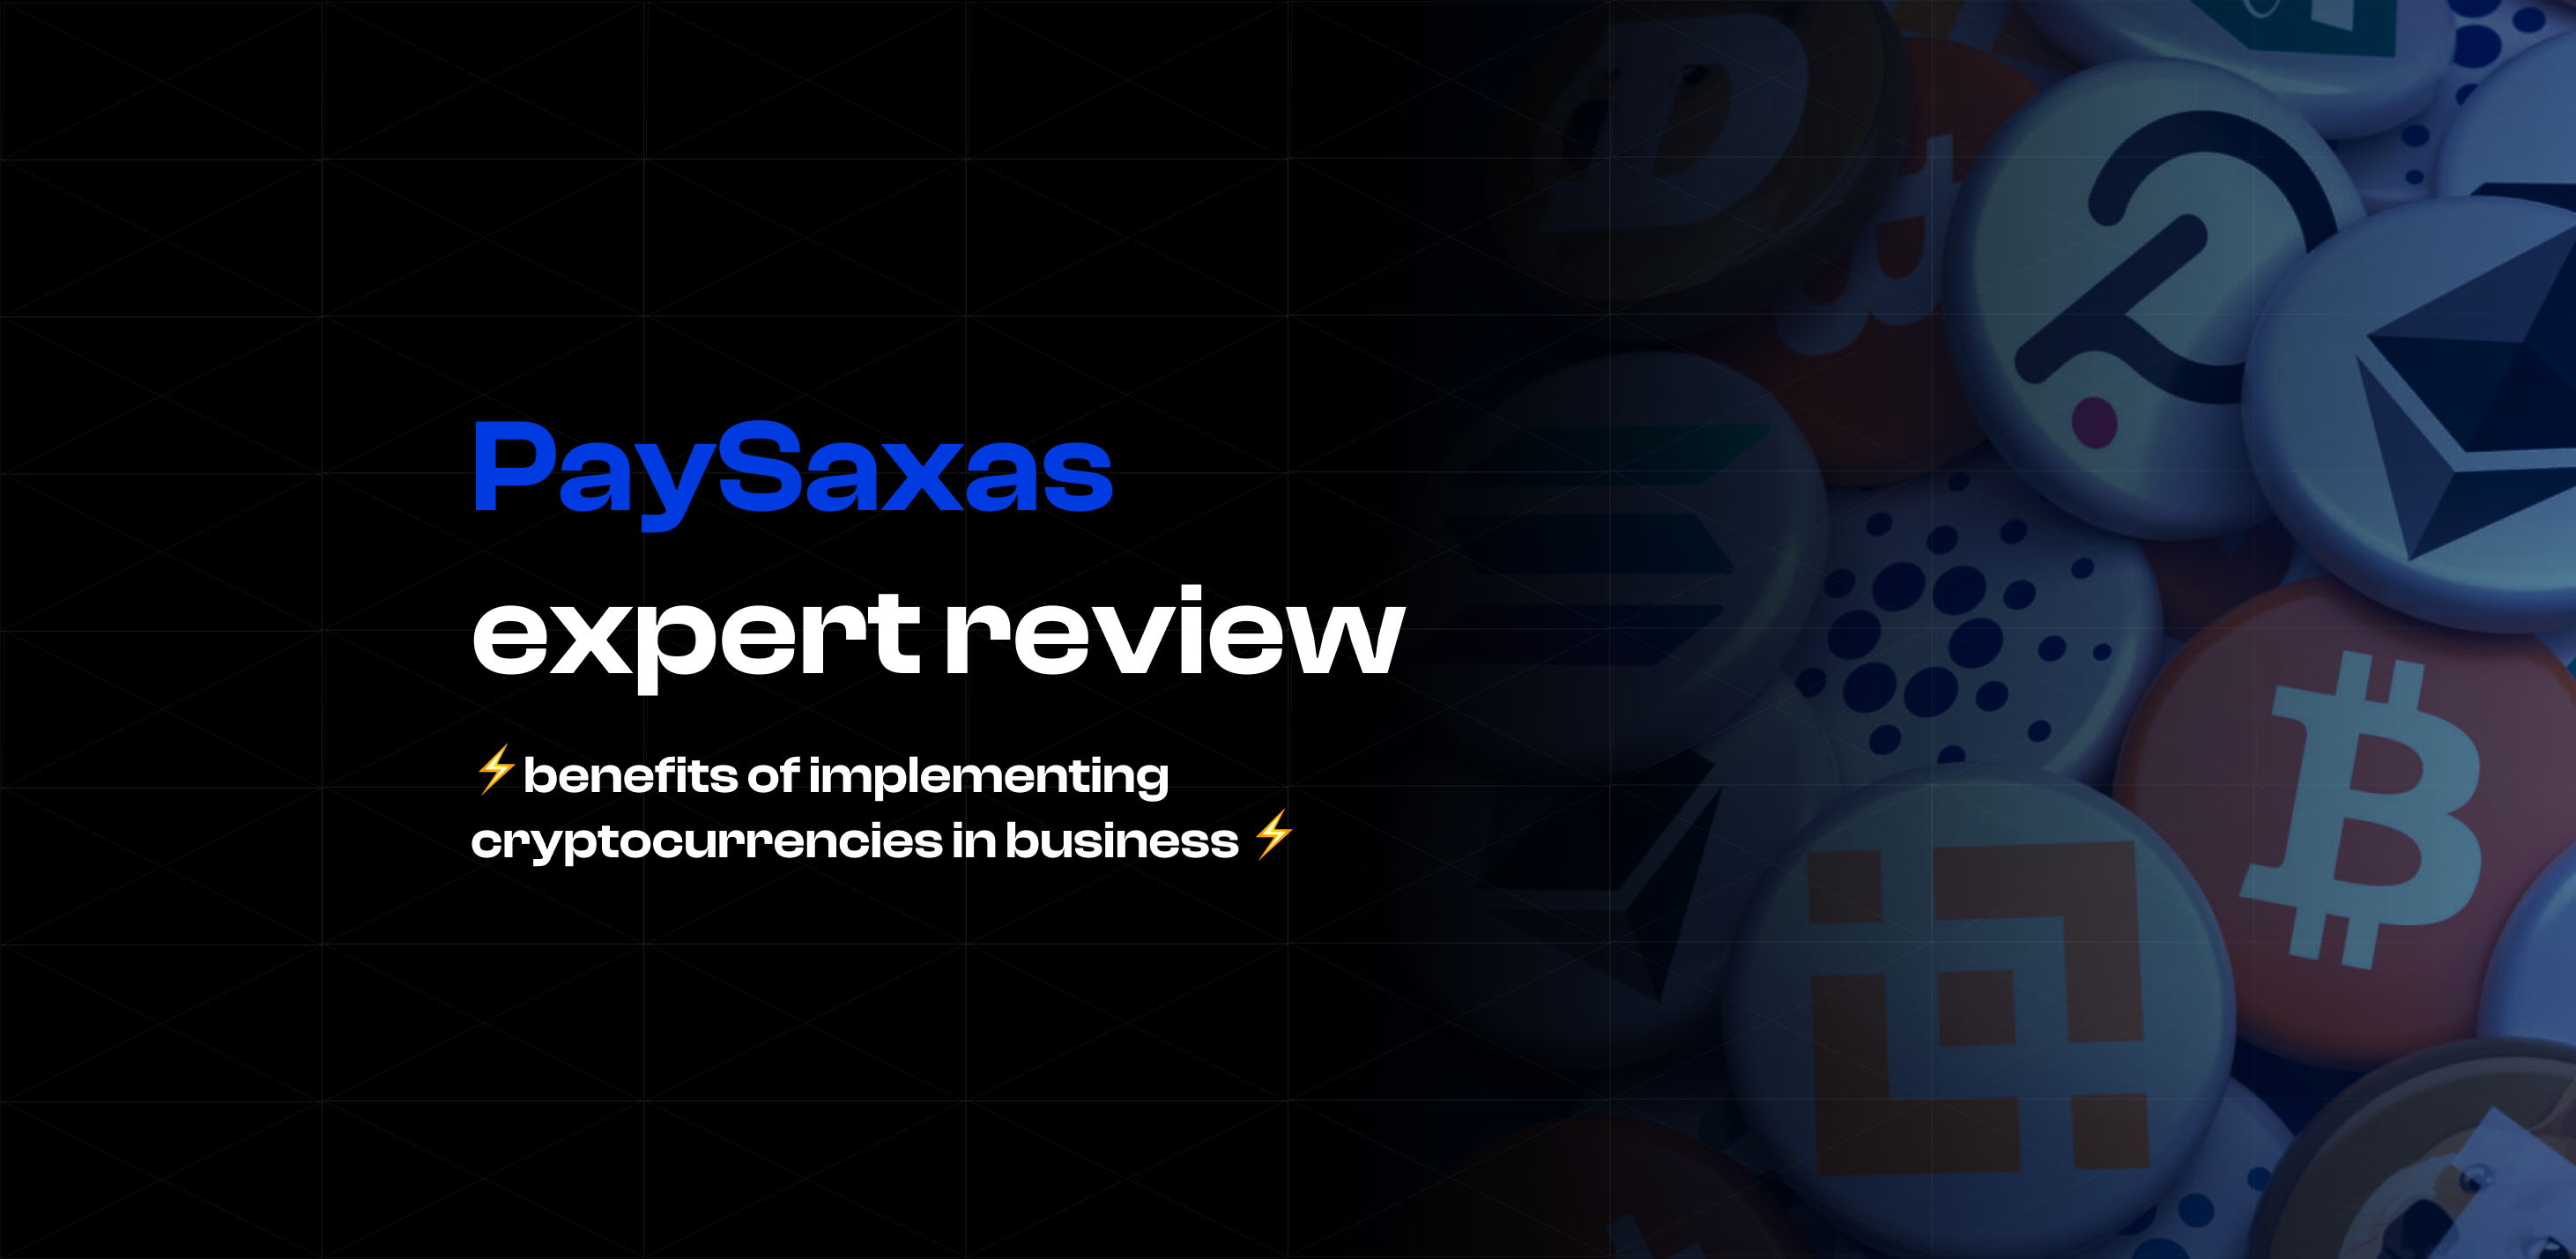 PaySaxas expert review: benefits of implementing cryptocurrencies in business